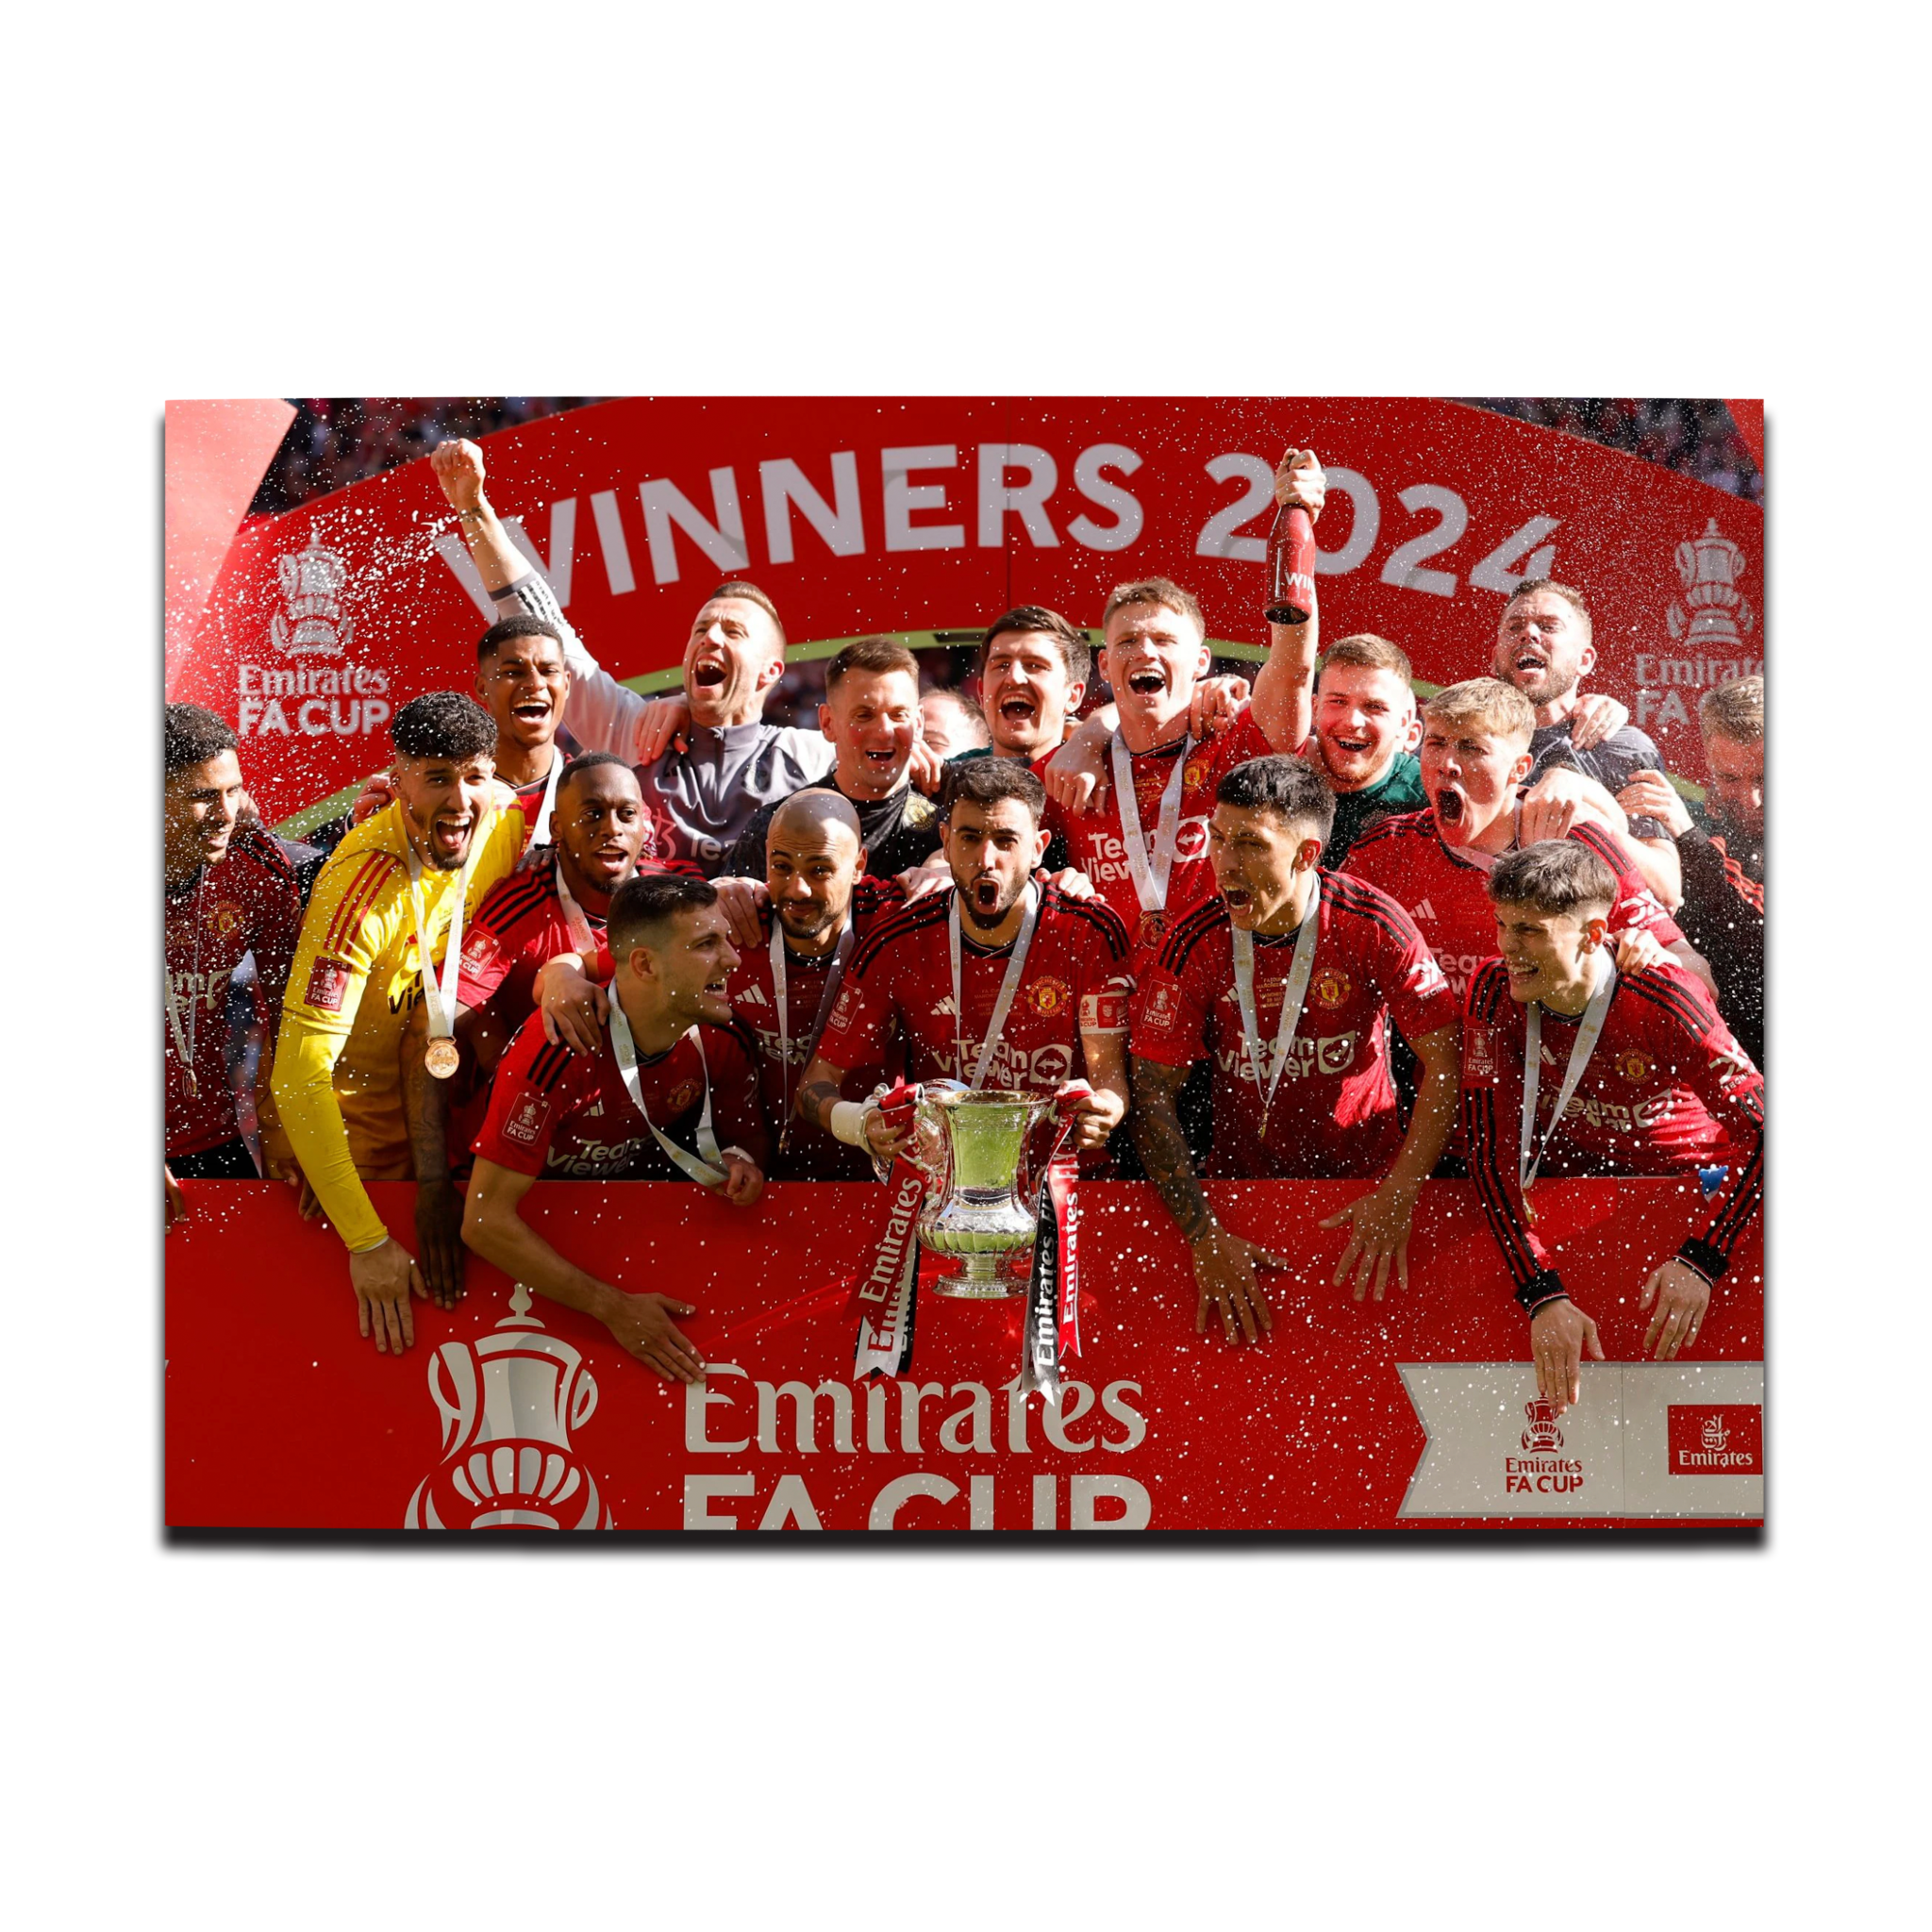 Manchester United FA Cup Winners 22/23 Photo Print, Manchester United Gift, ,Man United Present Ideas